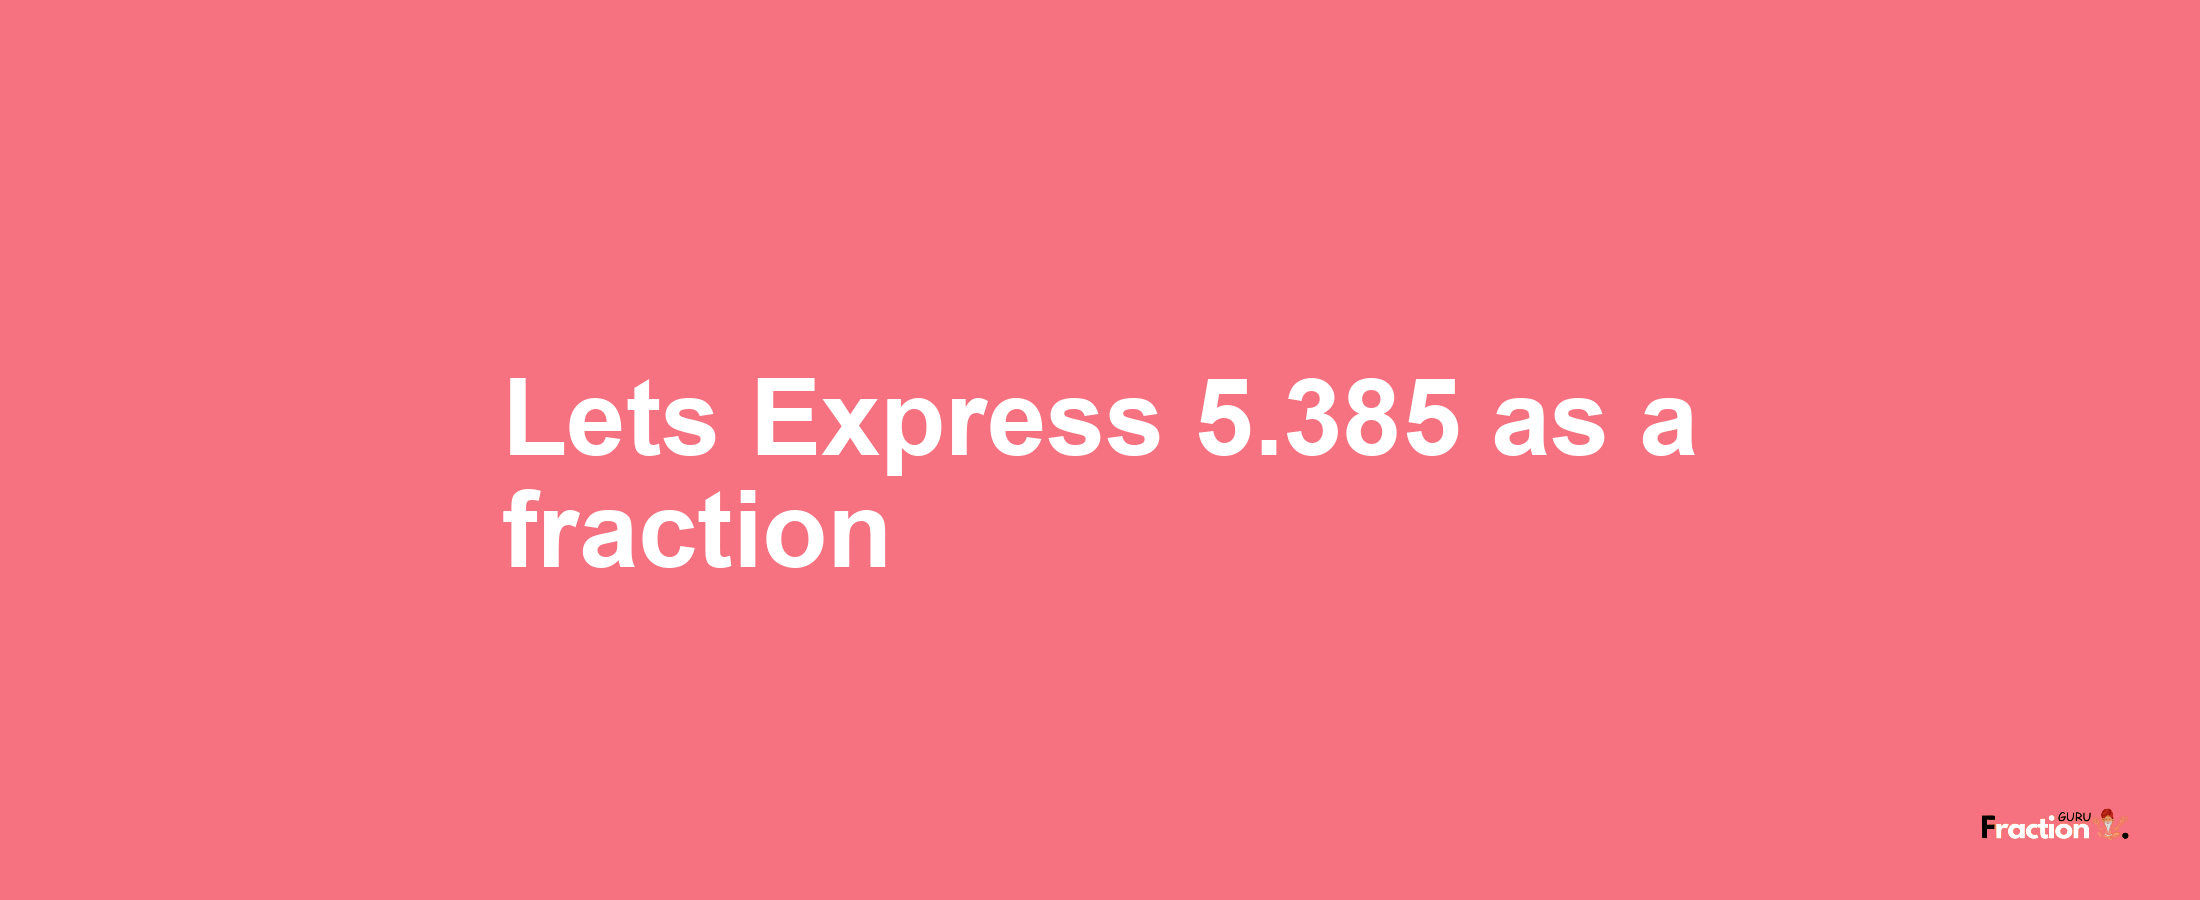 Lets Express 5.385 as afraction